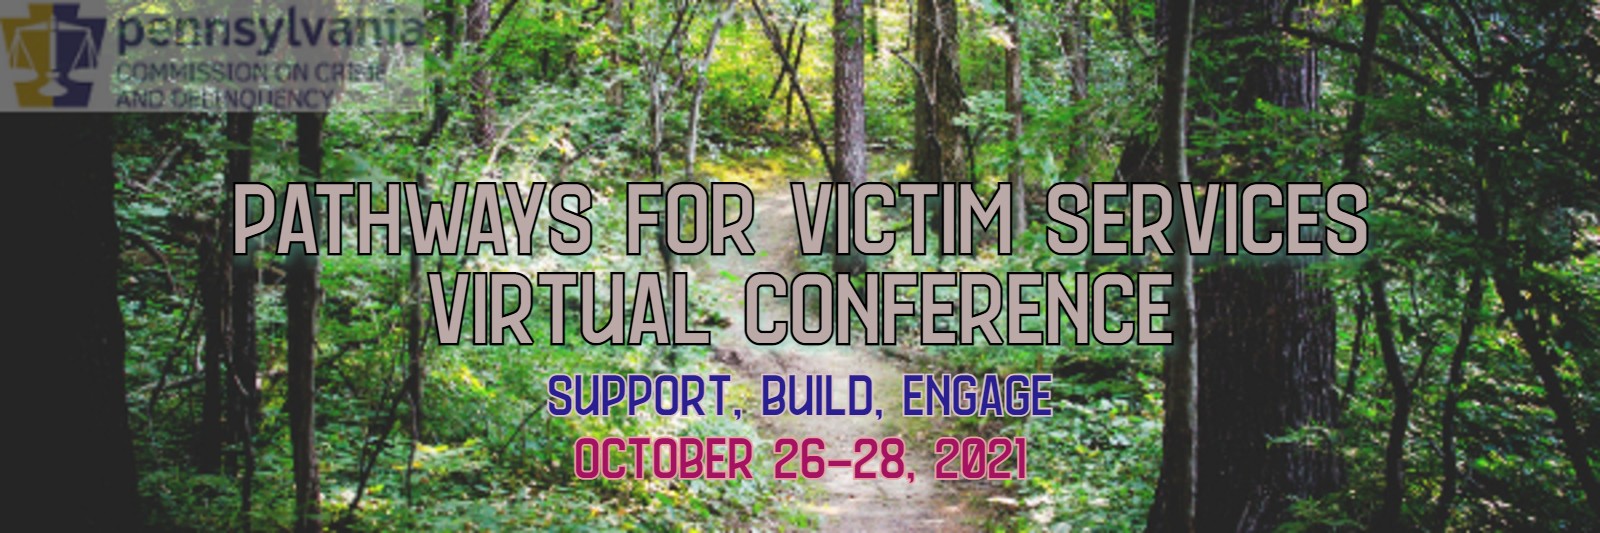 2021 Pathways for Victims Services Conference